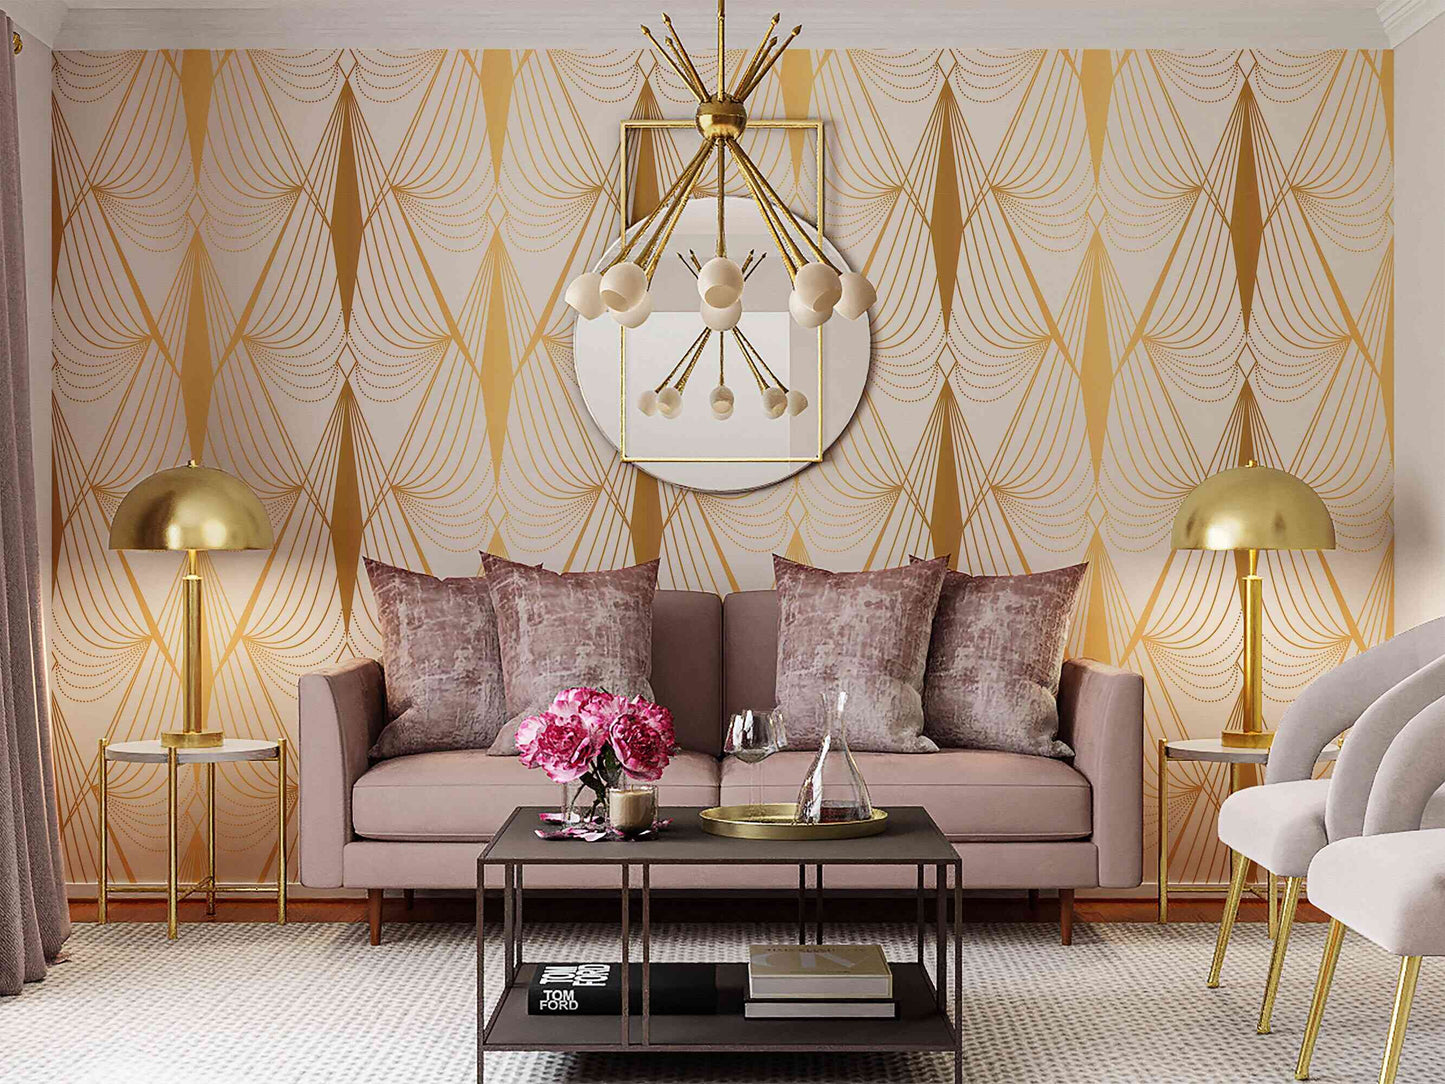 Rich Peel & Stick Wallpaper | Luxury Wall Covering for Accent Wallpapers